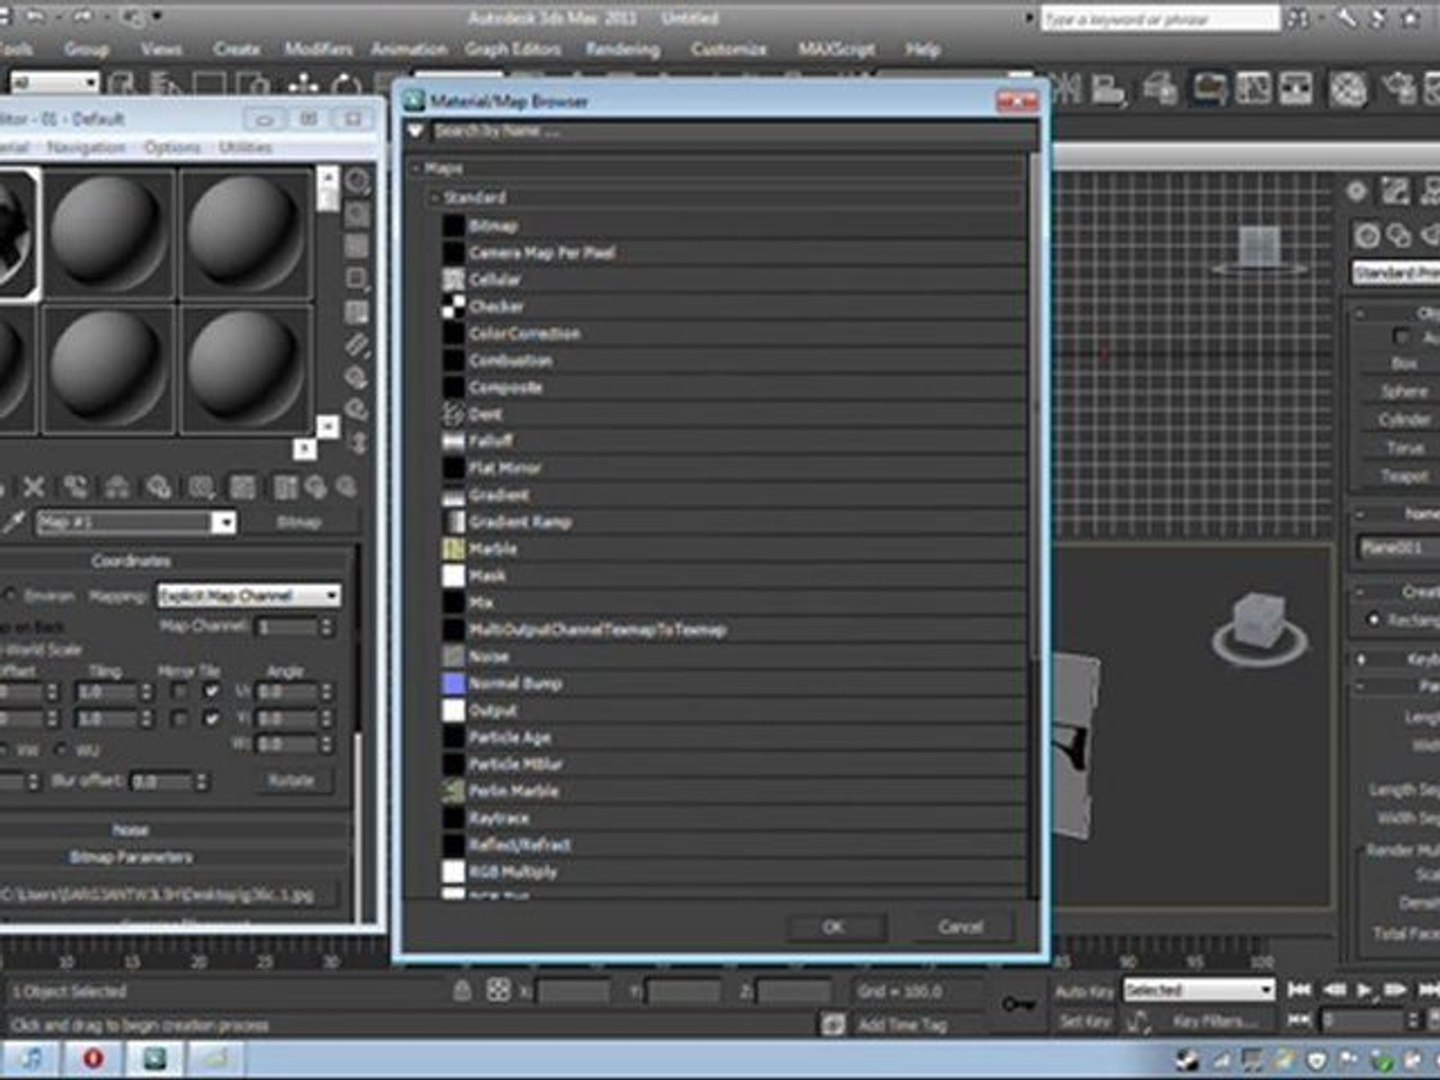 autodesk 3ds max 2008 free download full version with crack